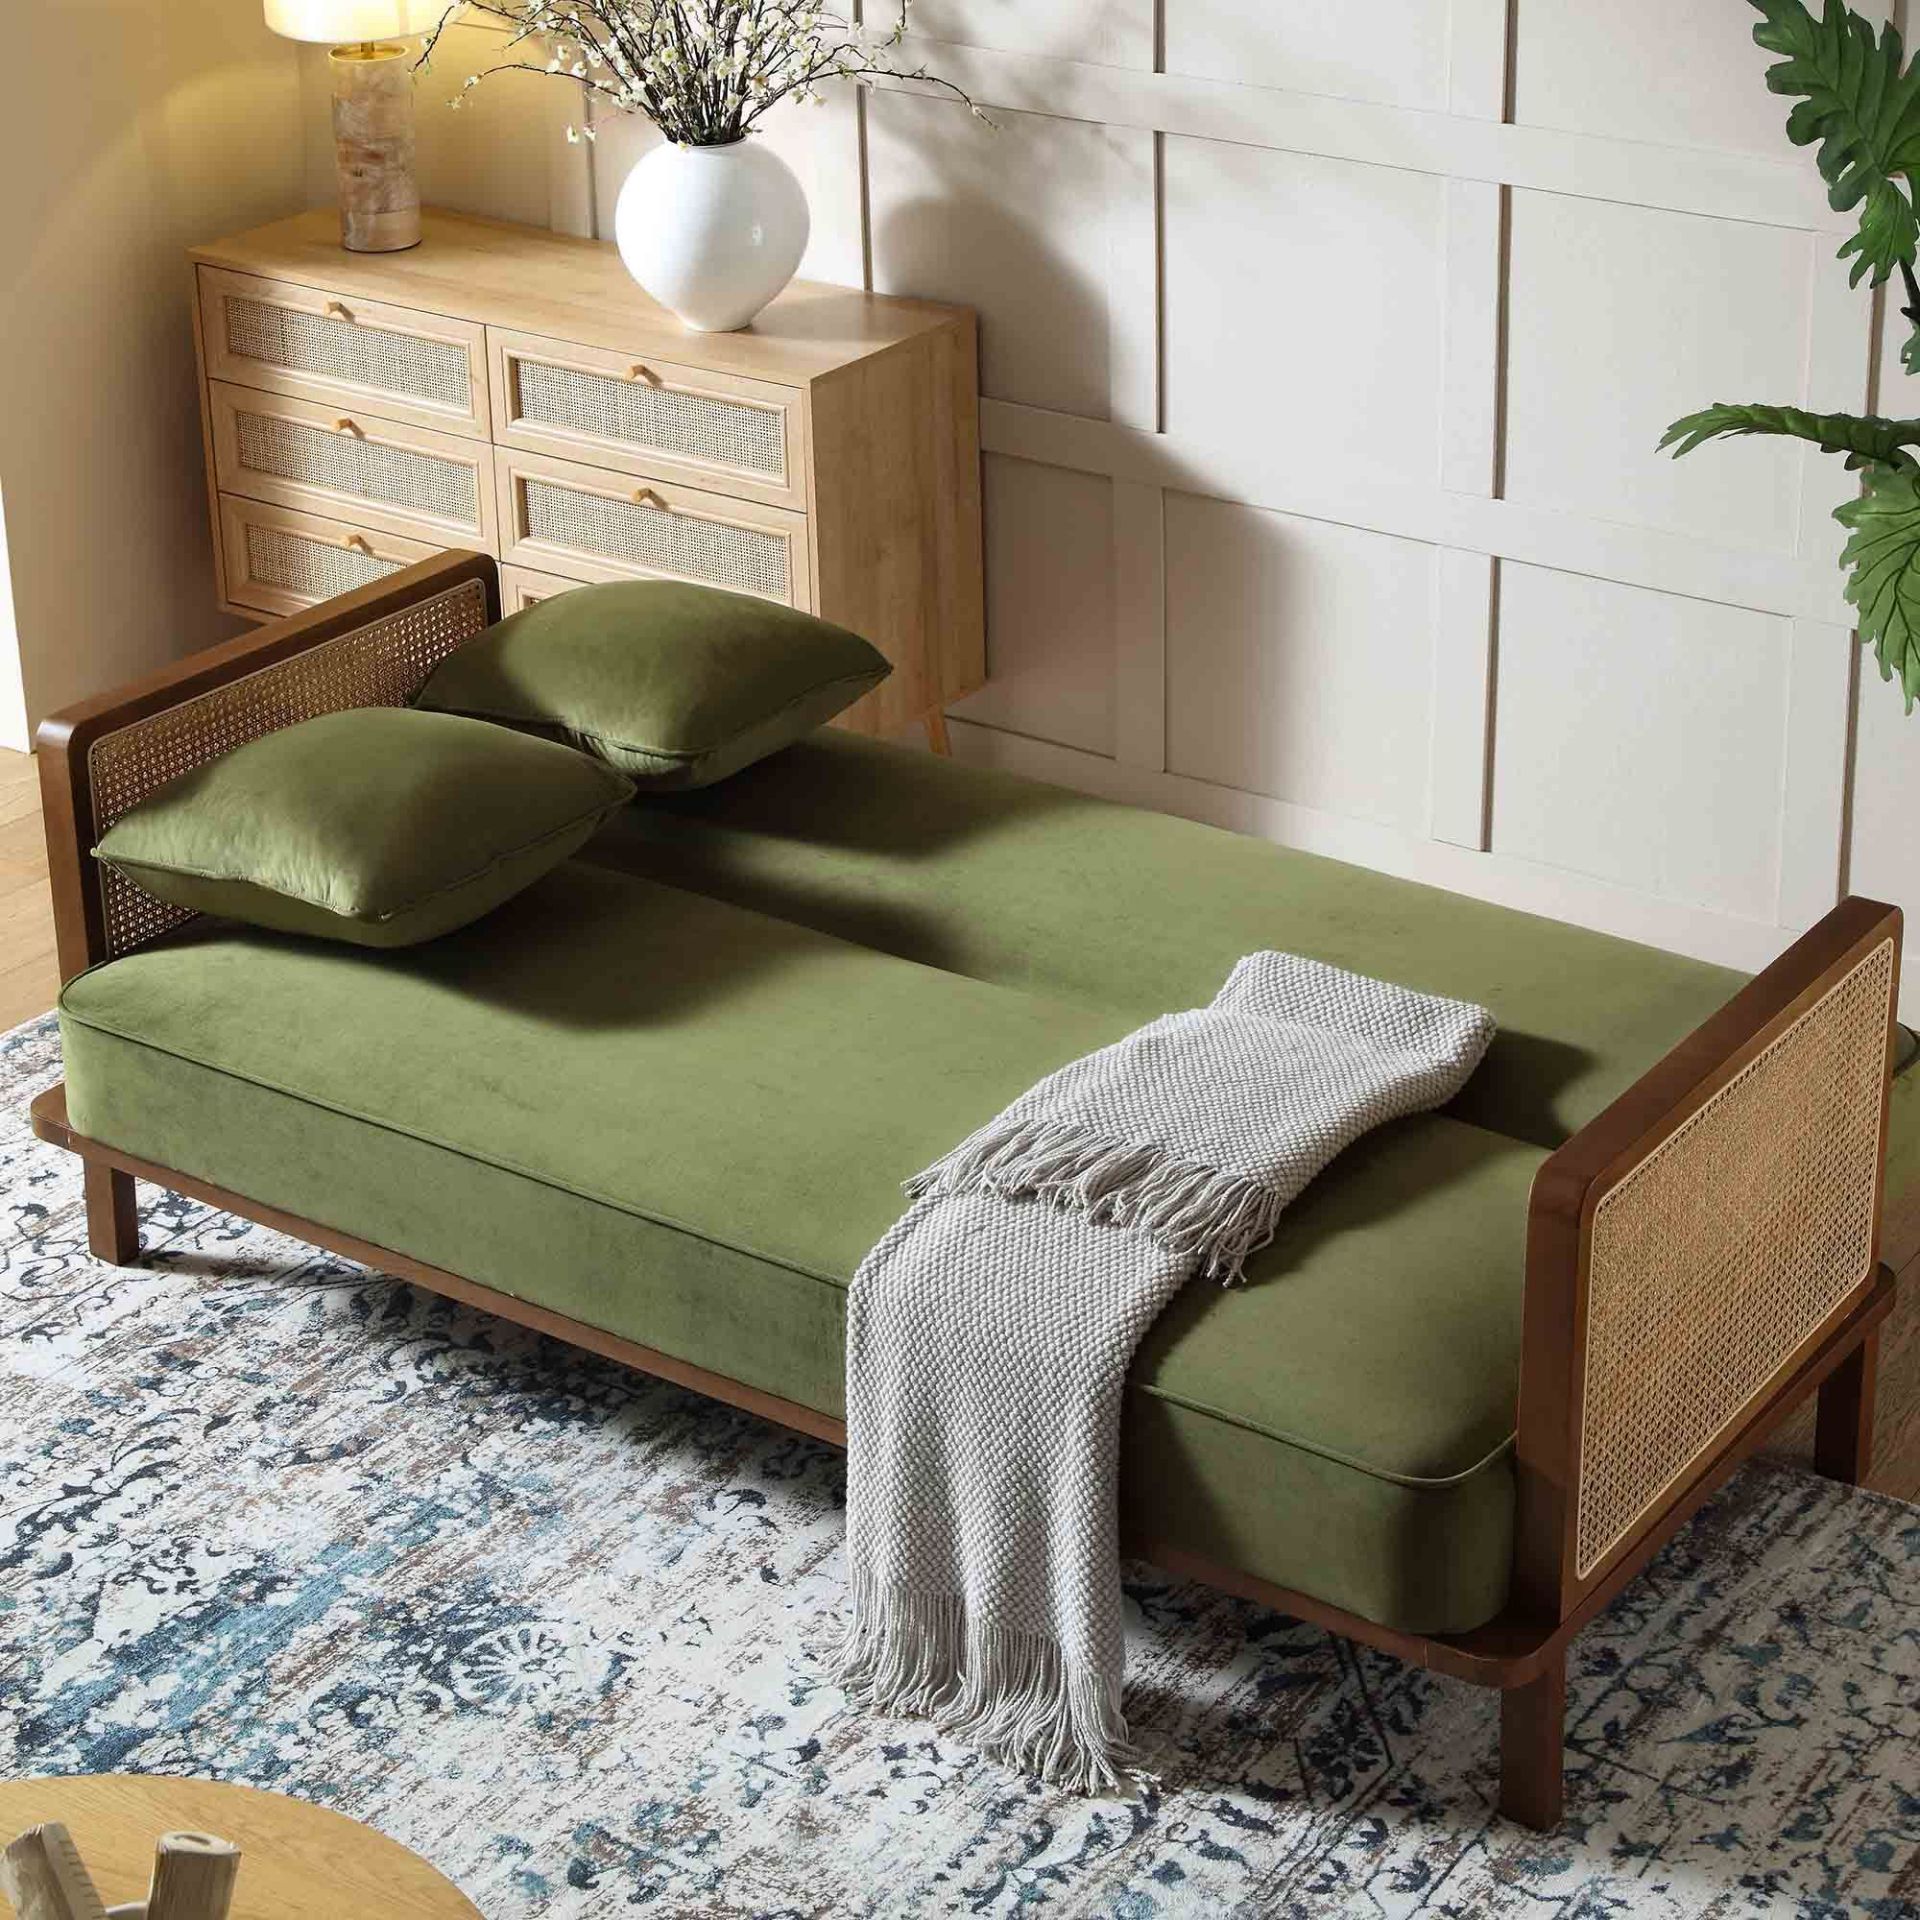 Pienza Cane Sofa Bed, Moss Green Velvet with Walnut Frame. - R14. RRP £649.99. Upholstered in - Image 2 of 2